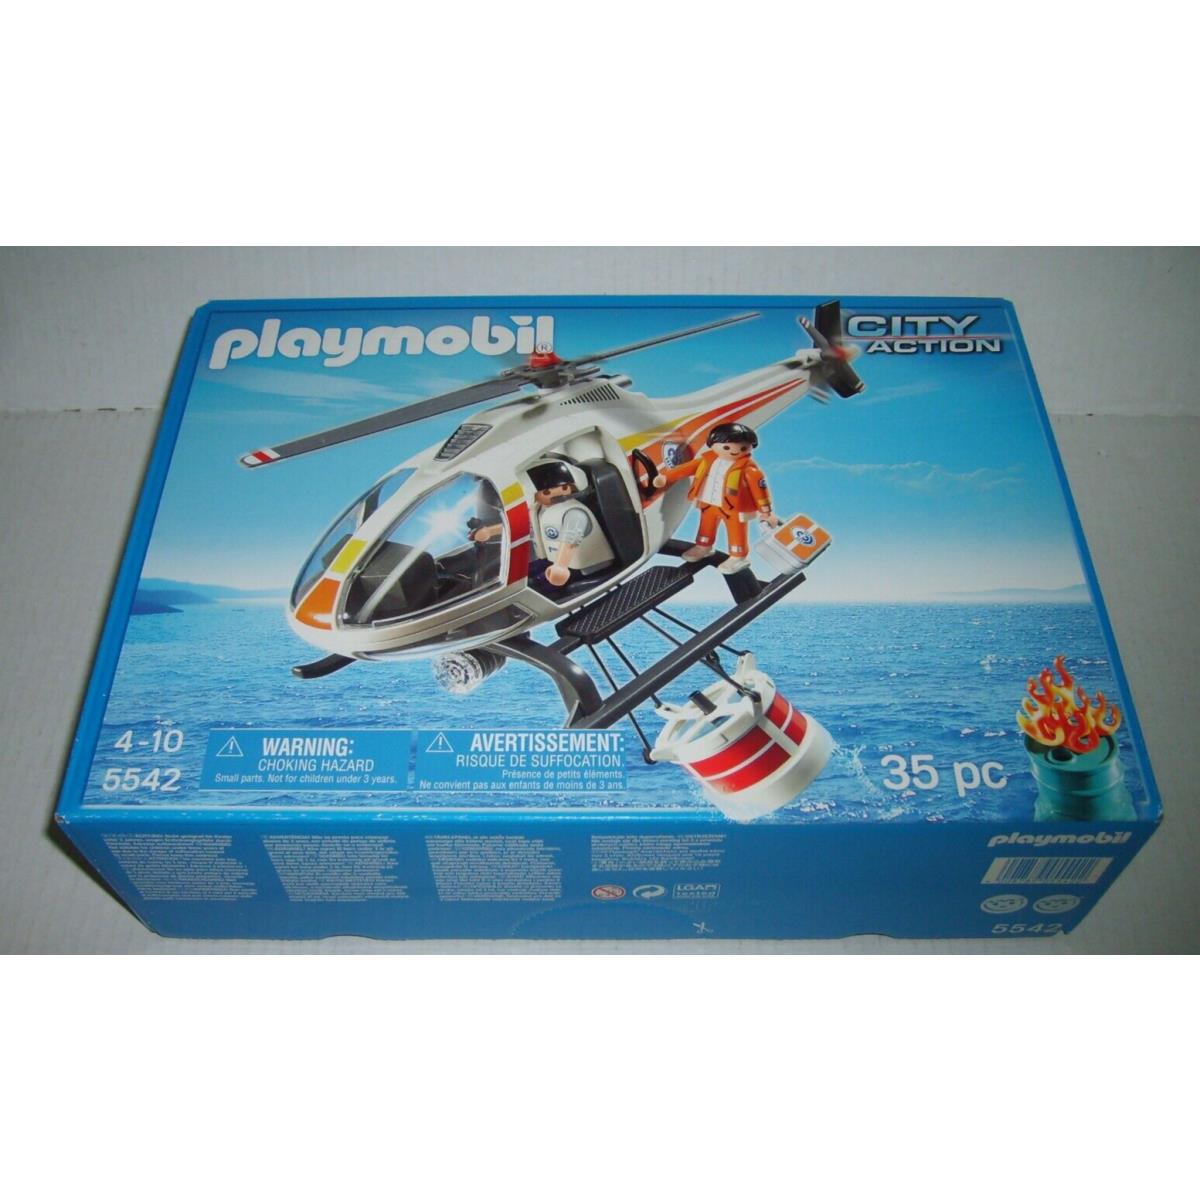 Playmobil 5542 Fire Fighting Helicopter IN Box Playset Misb